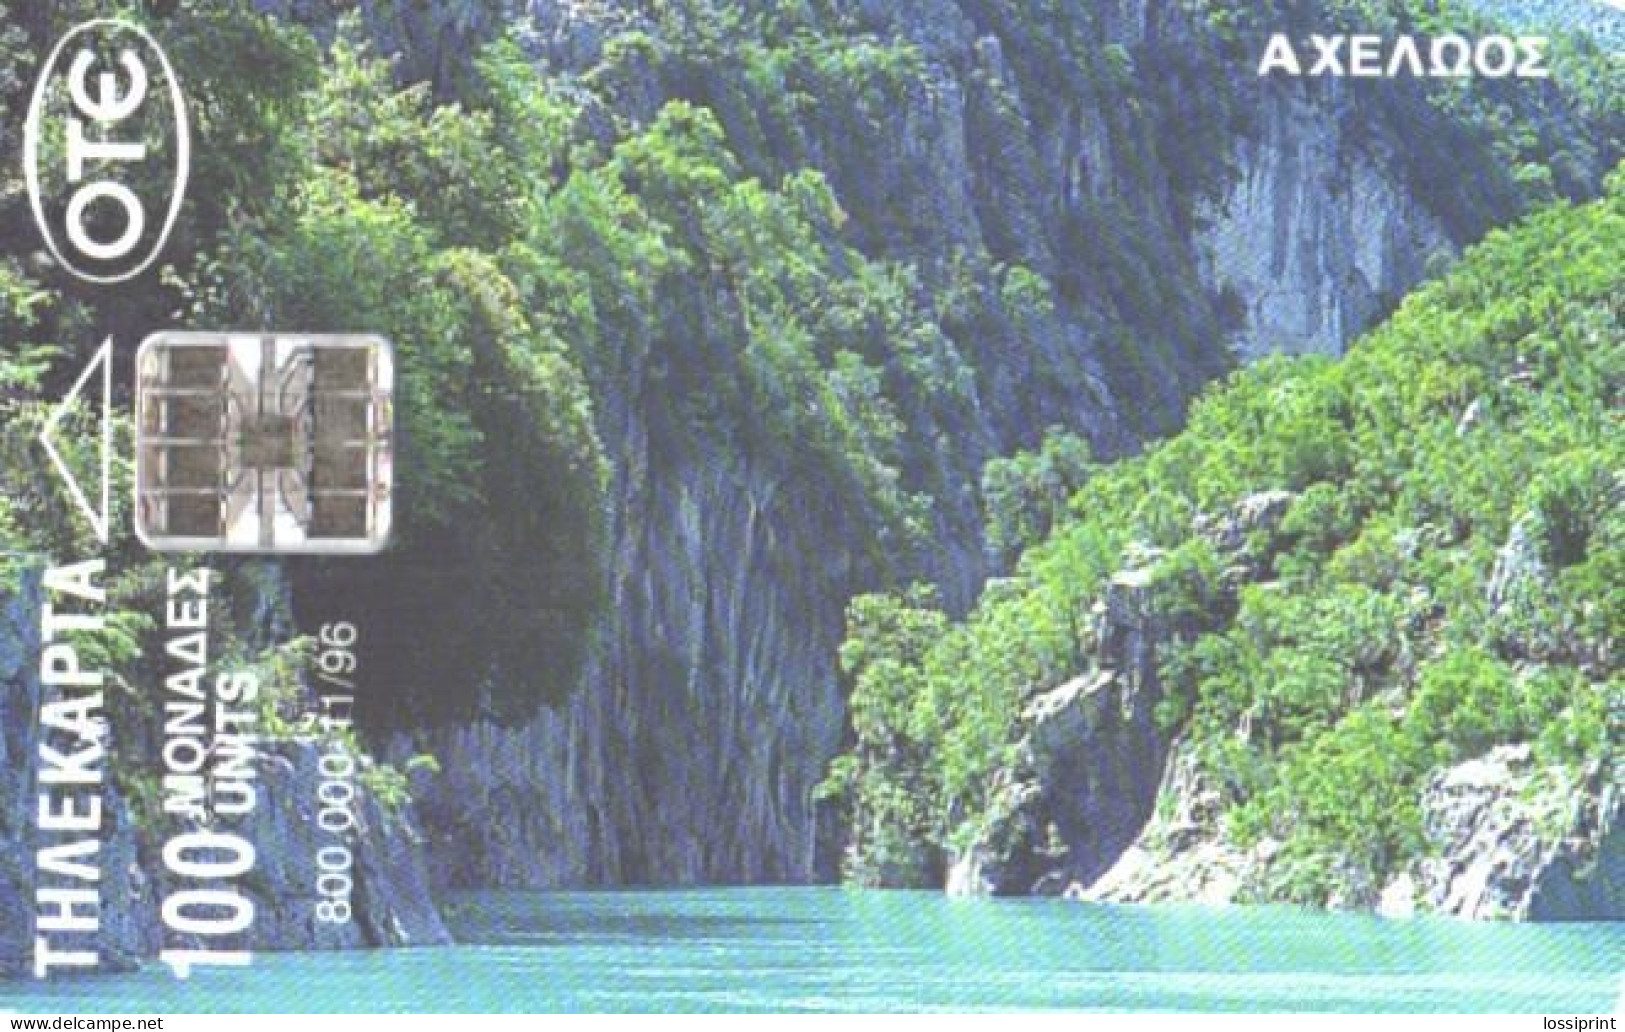 Greece:Used Phonecard, OTE, 100 Units, Rafting, Axelooz, 1996 - Griechenland